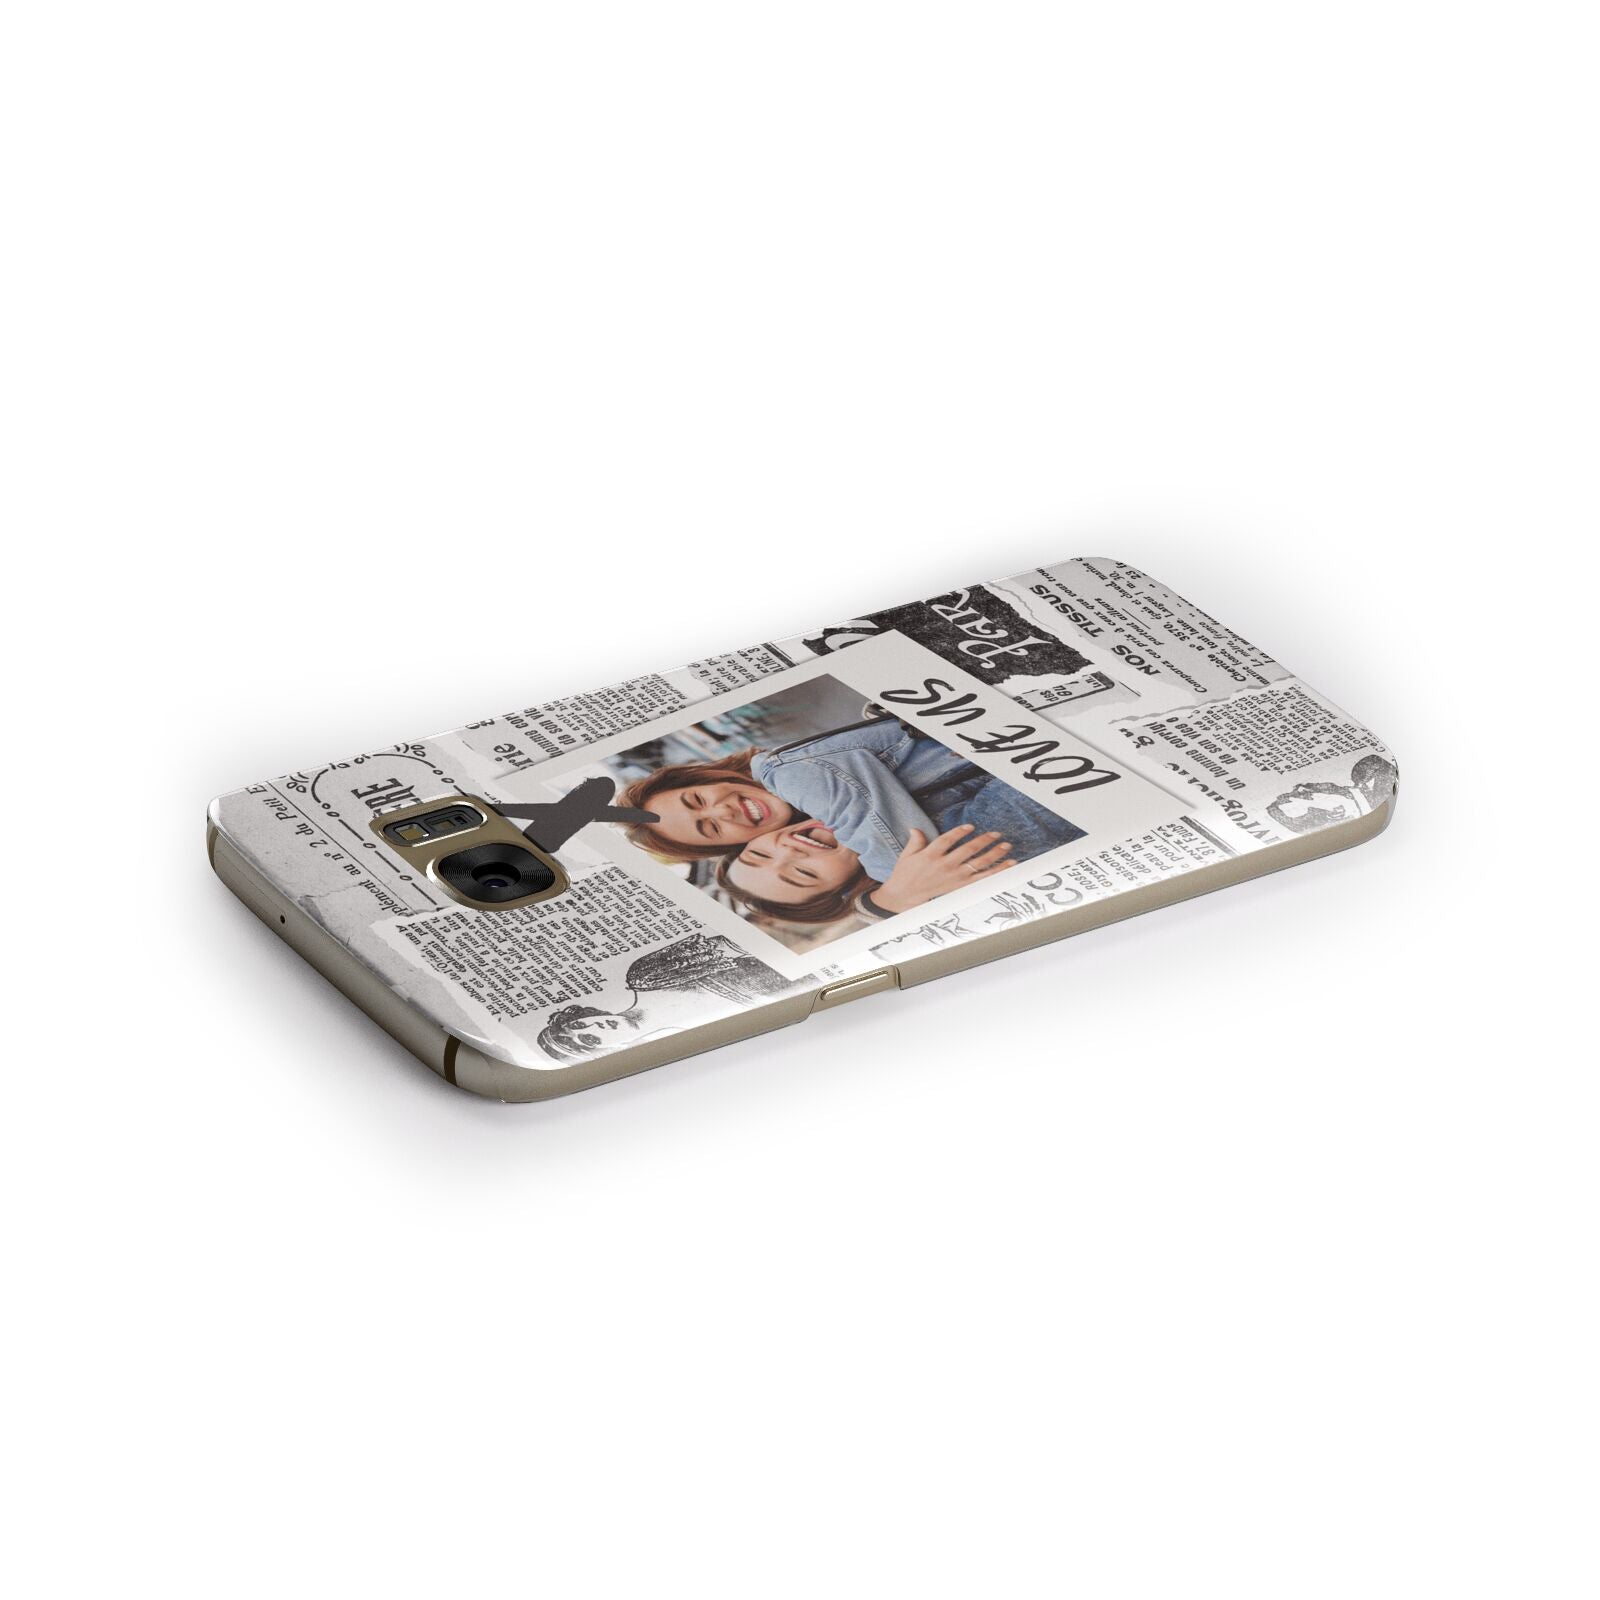 Newspaper Collage Photo Personalised Samsung Galaxy Case Side Close Up